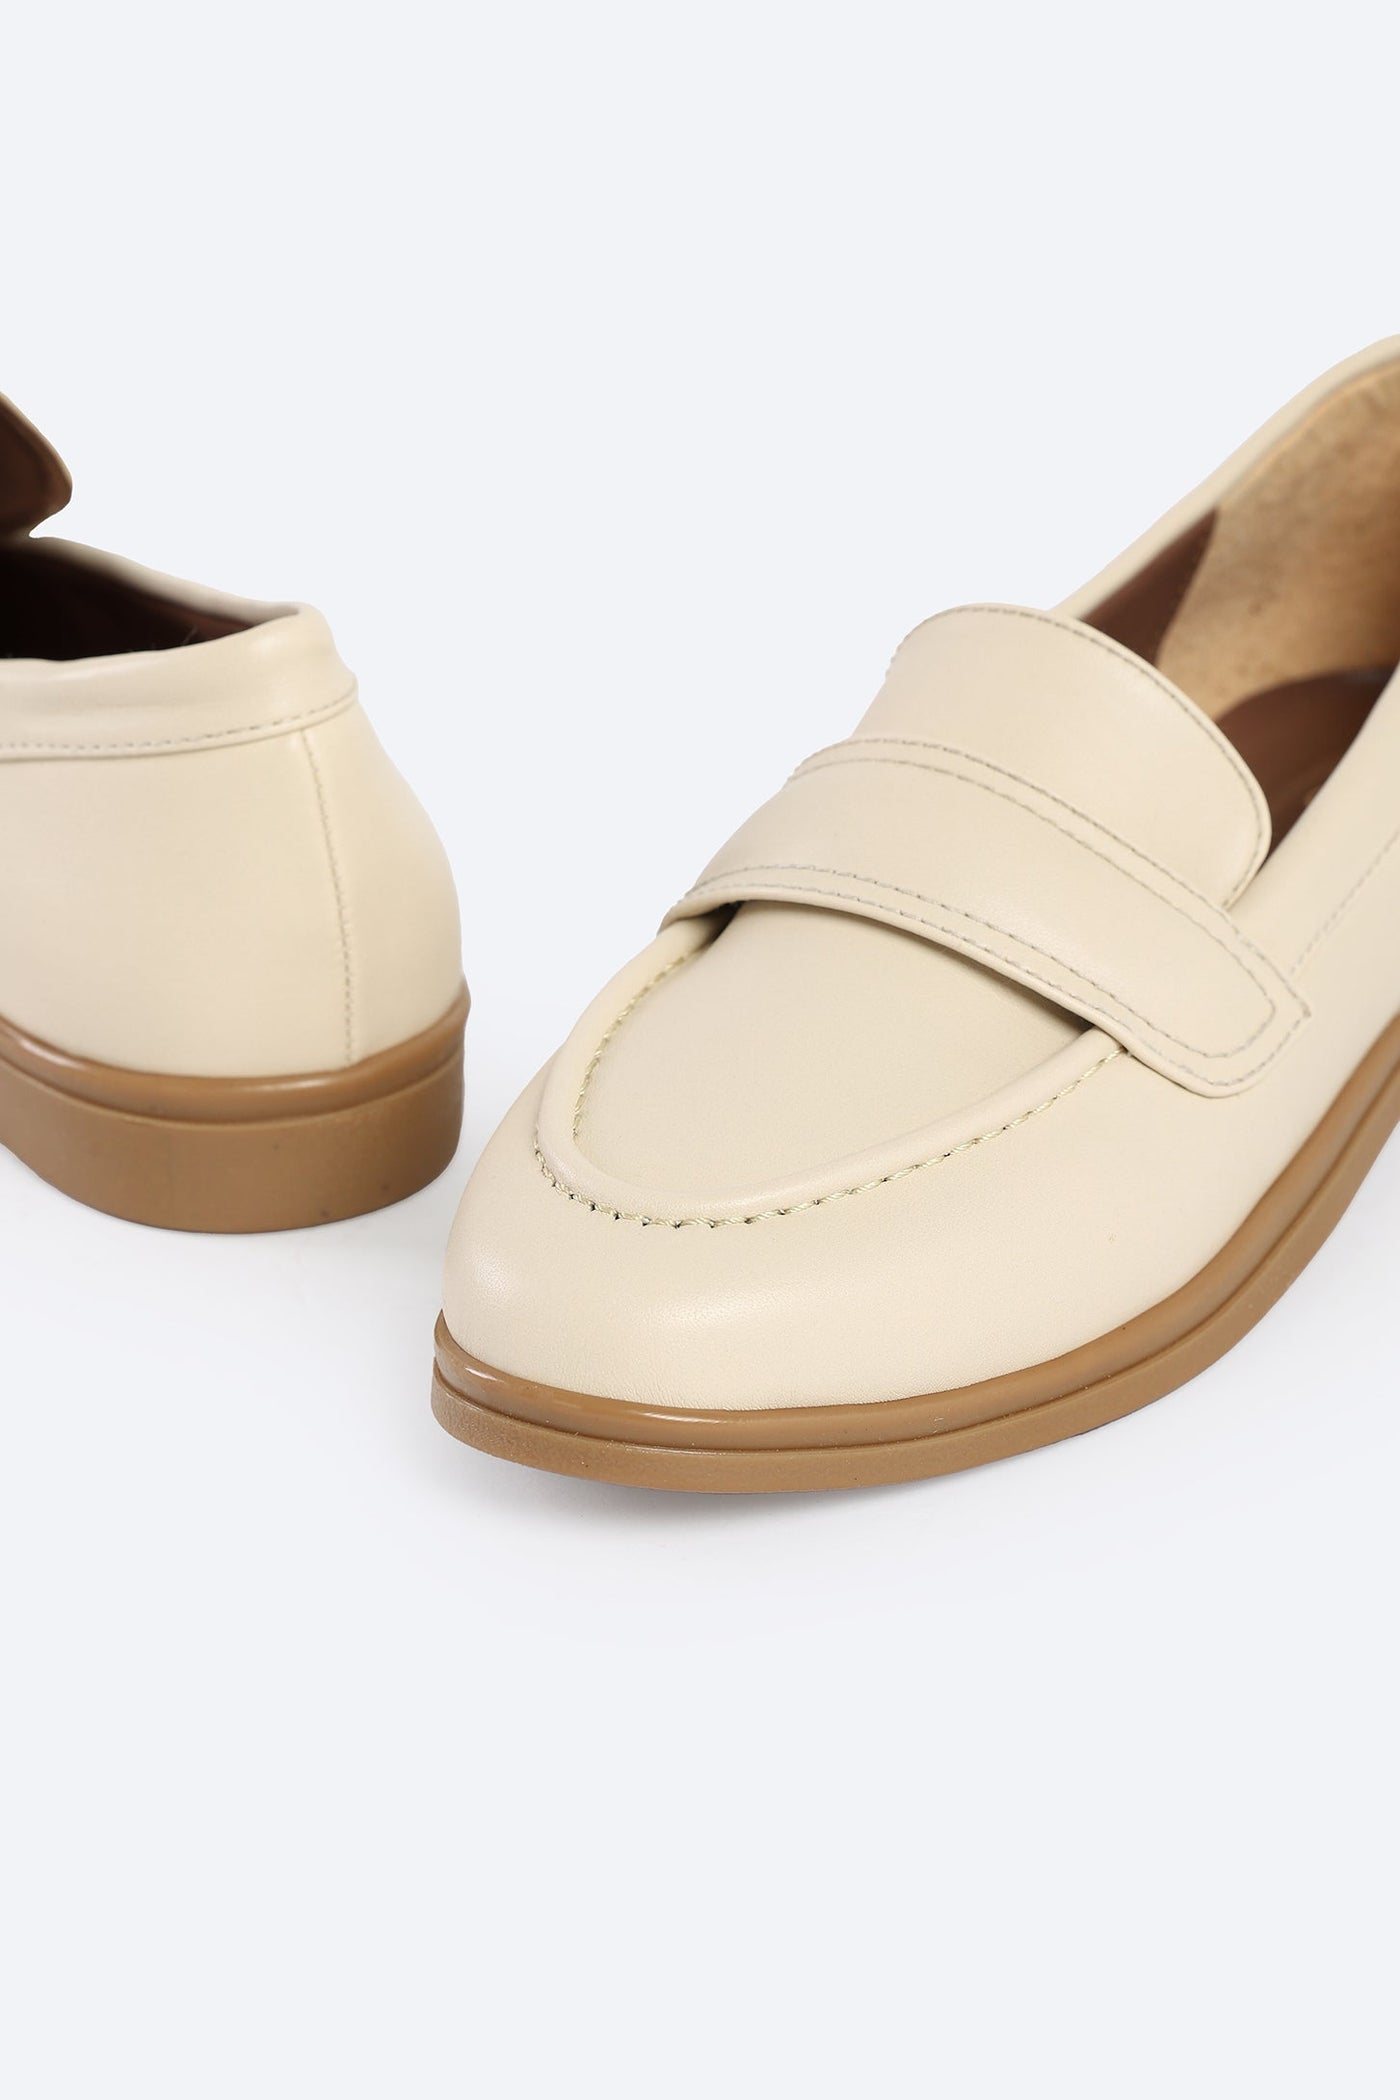 Everyday Ease Loafers - Beige